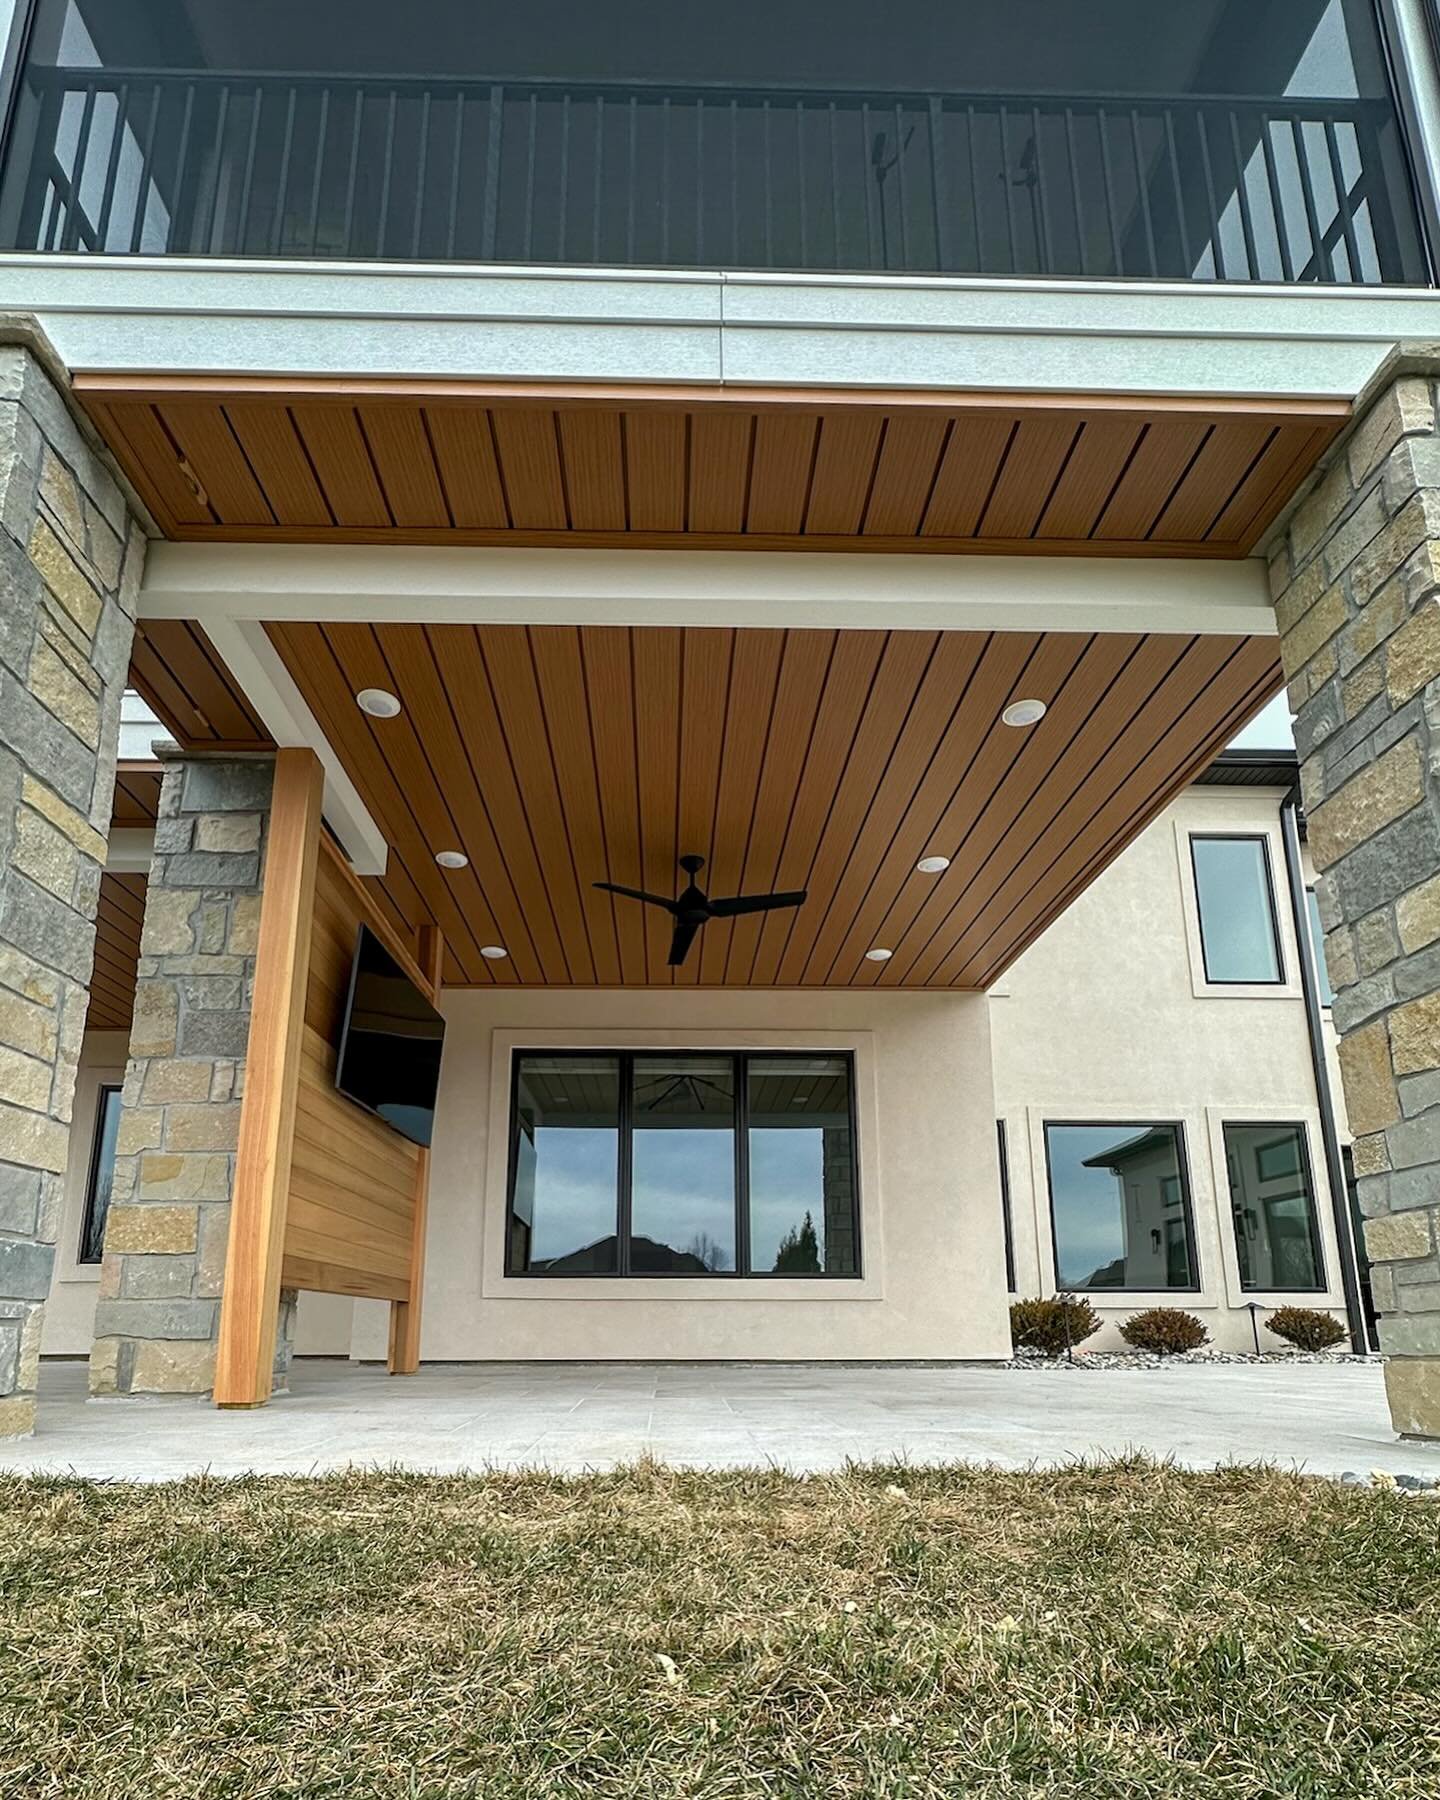 Looking to make the most of your outdoor space? We can help with that!

Underdecking is an excellent choice to expand the use and function of your second-story or multi-level deck.

Underdecking is a deck ceiling and drainage system that keeps your p